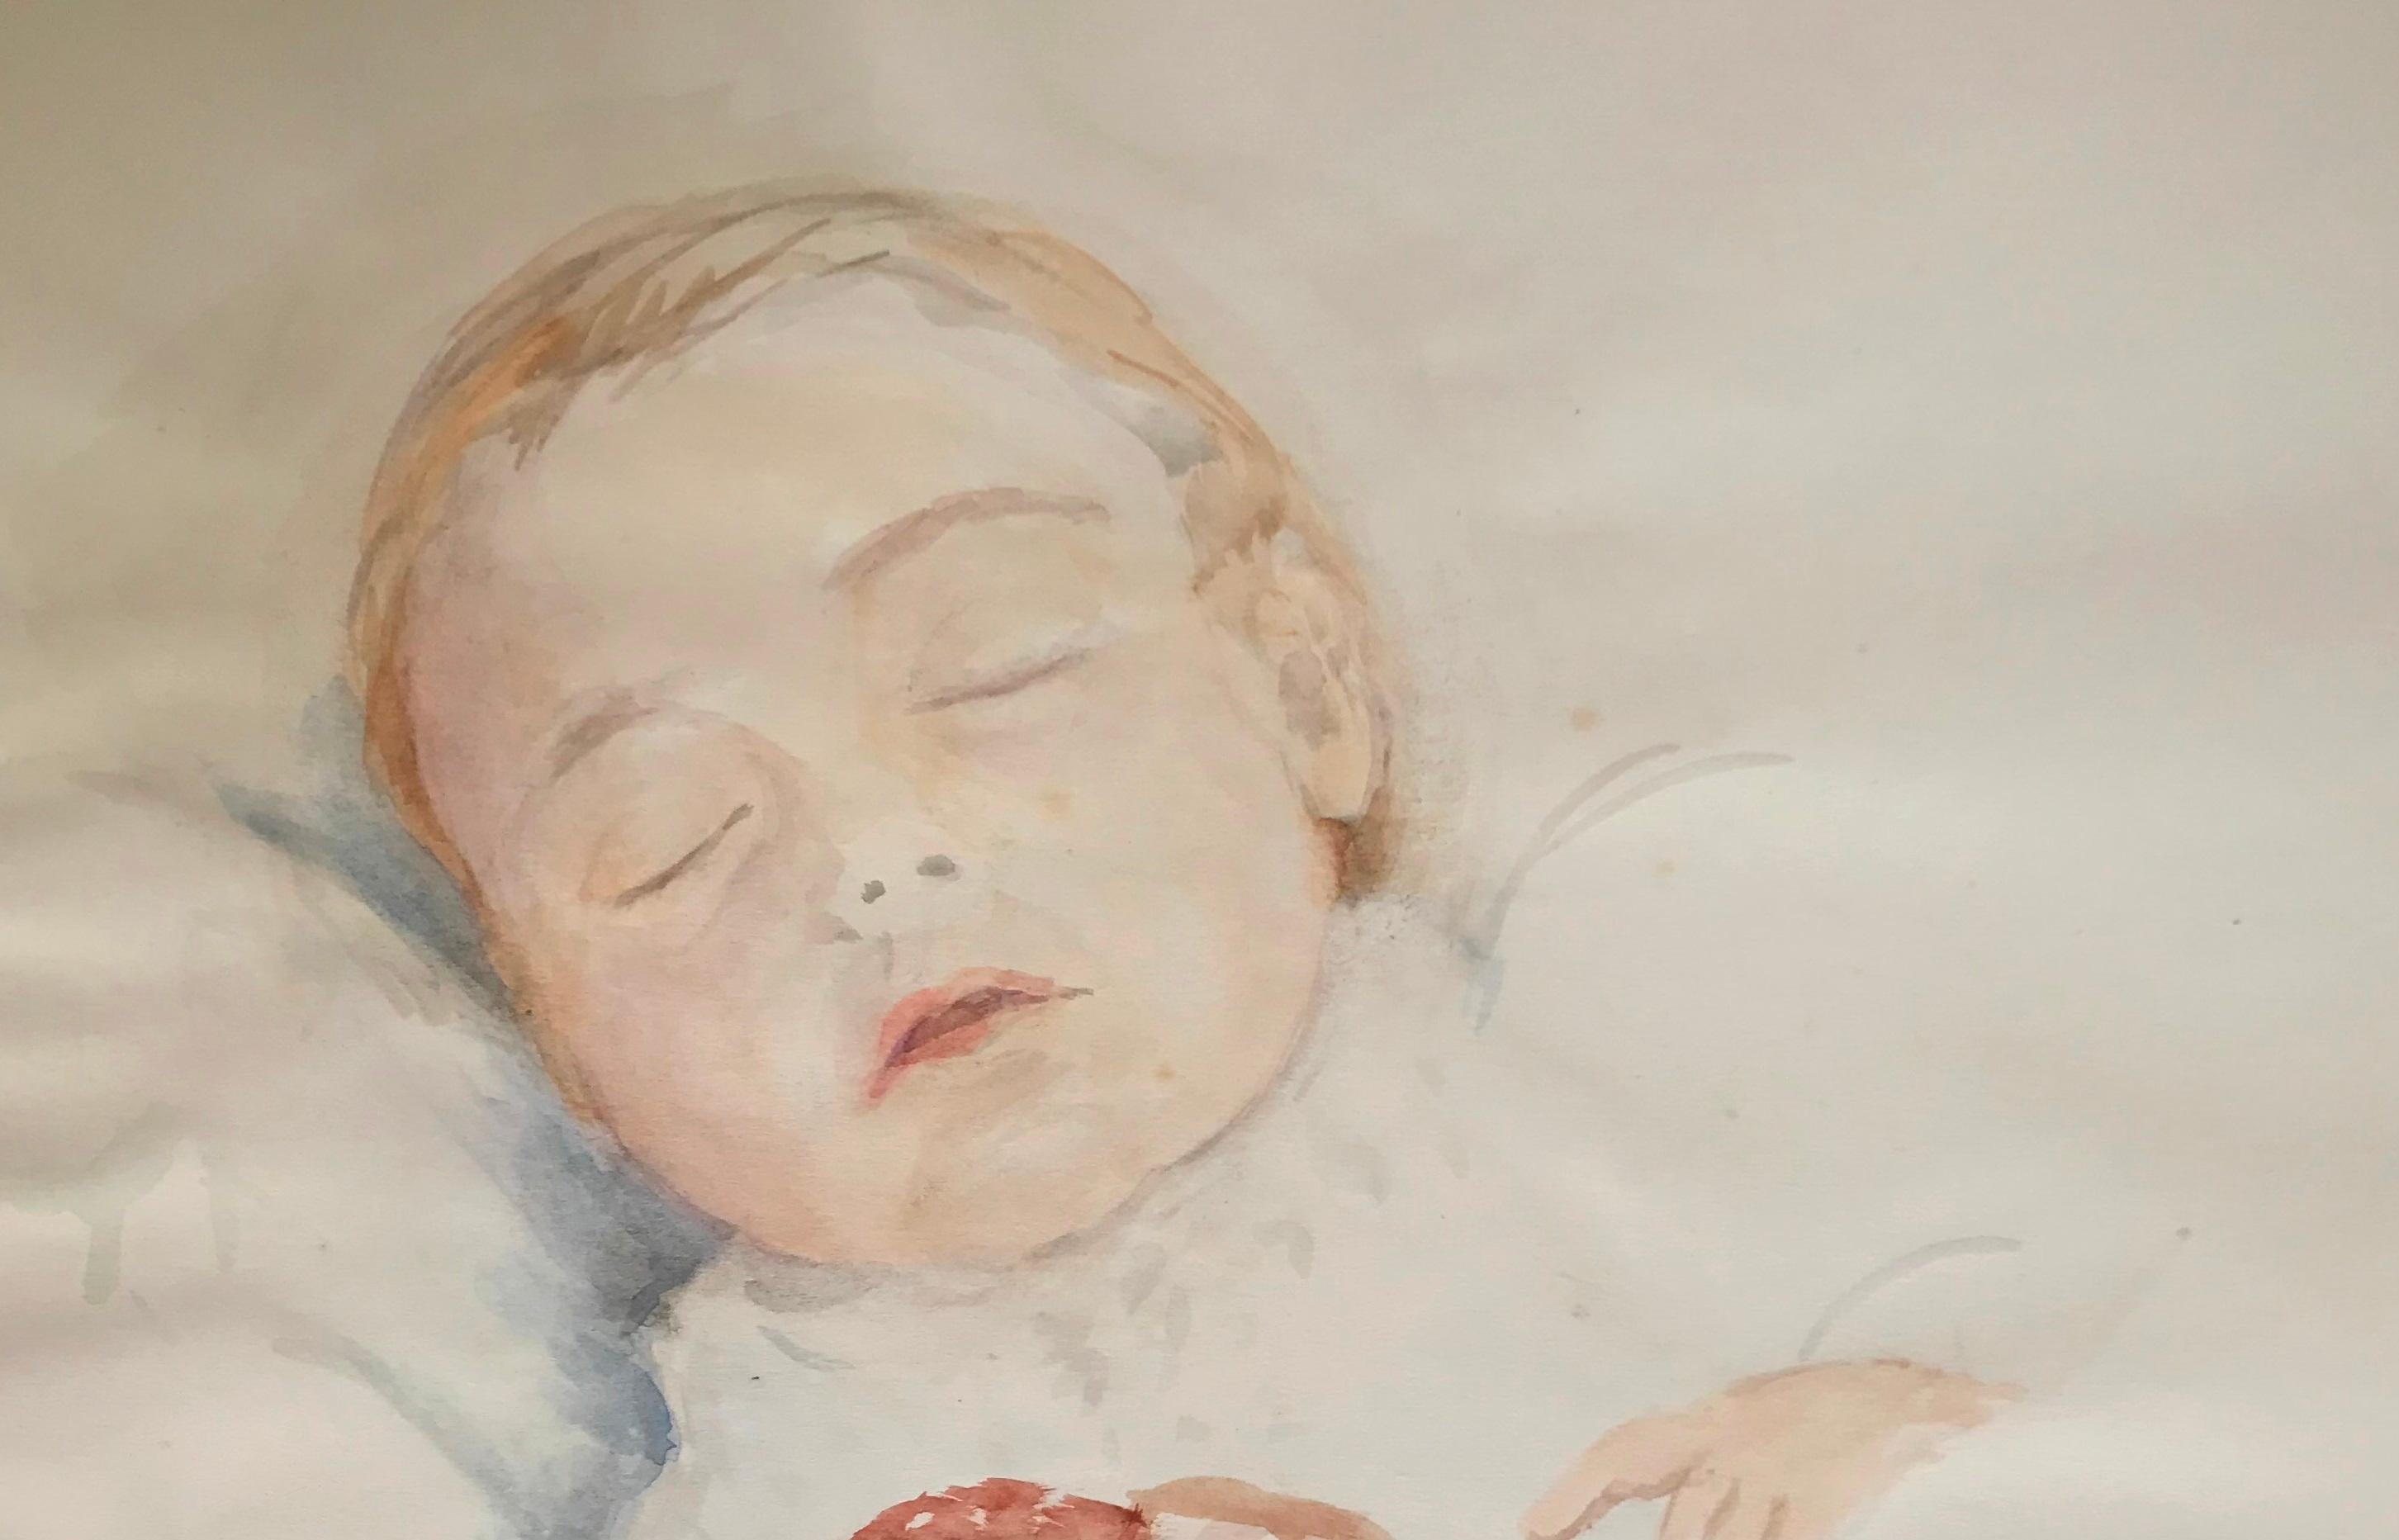 Rosemary - watercolor, portrait, infant, realism, Vienna, mid 20th century - Art by Silvia Koller